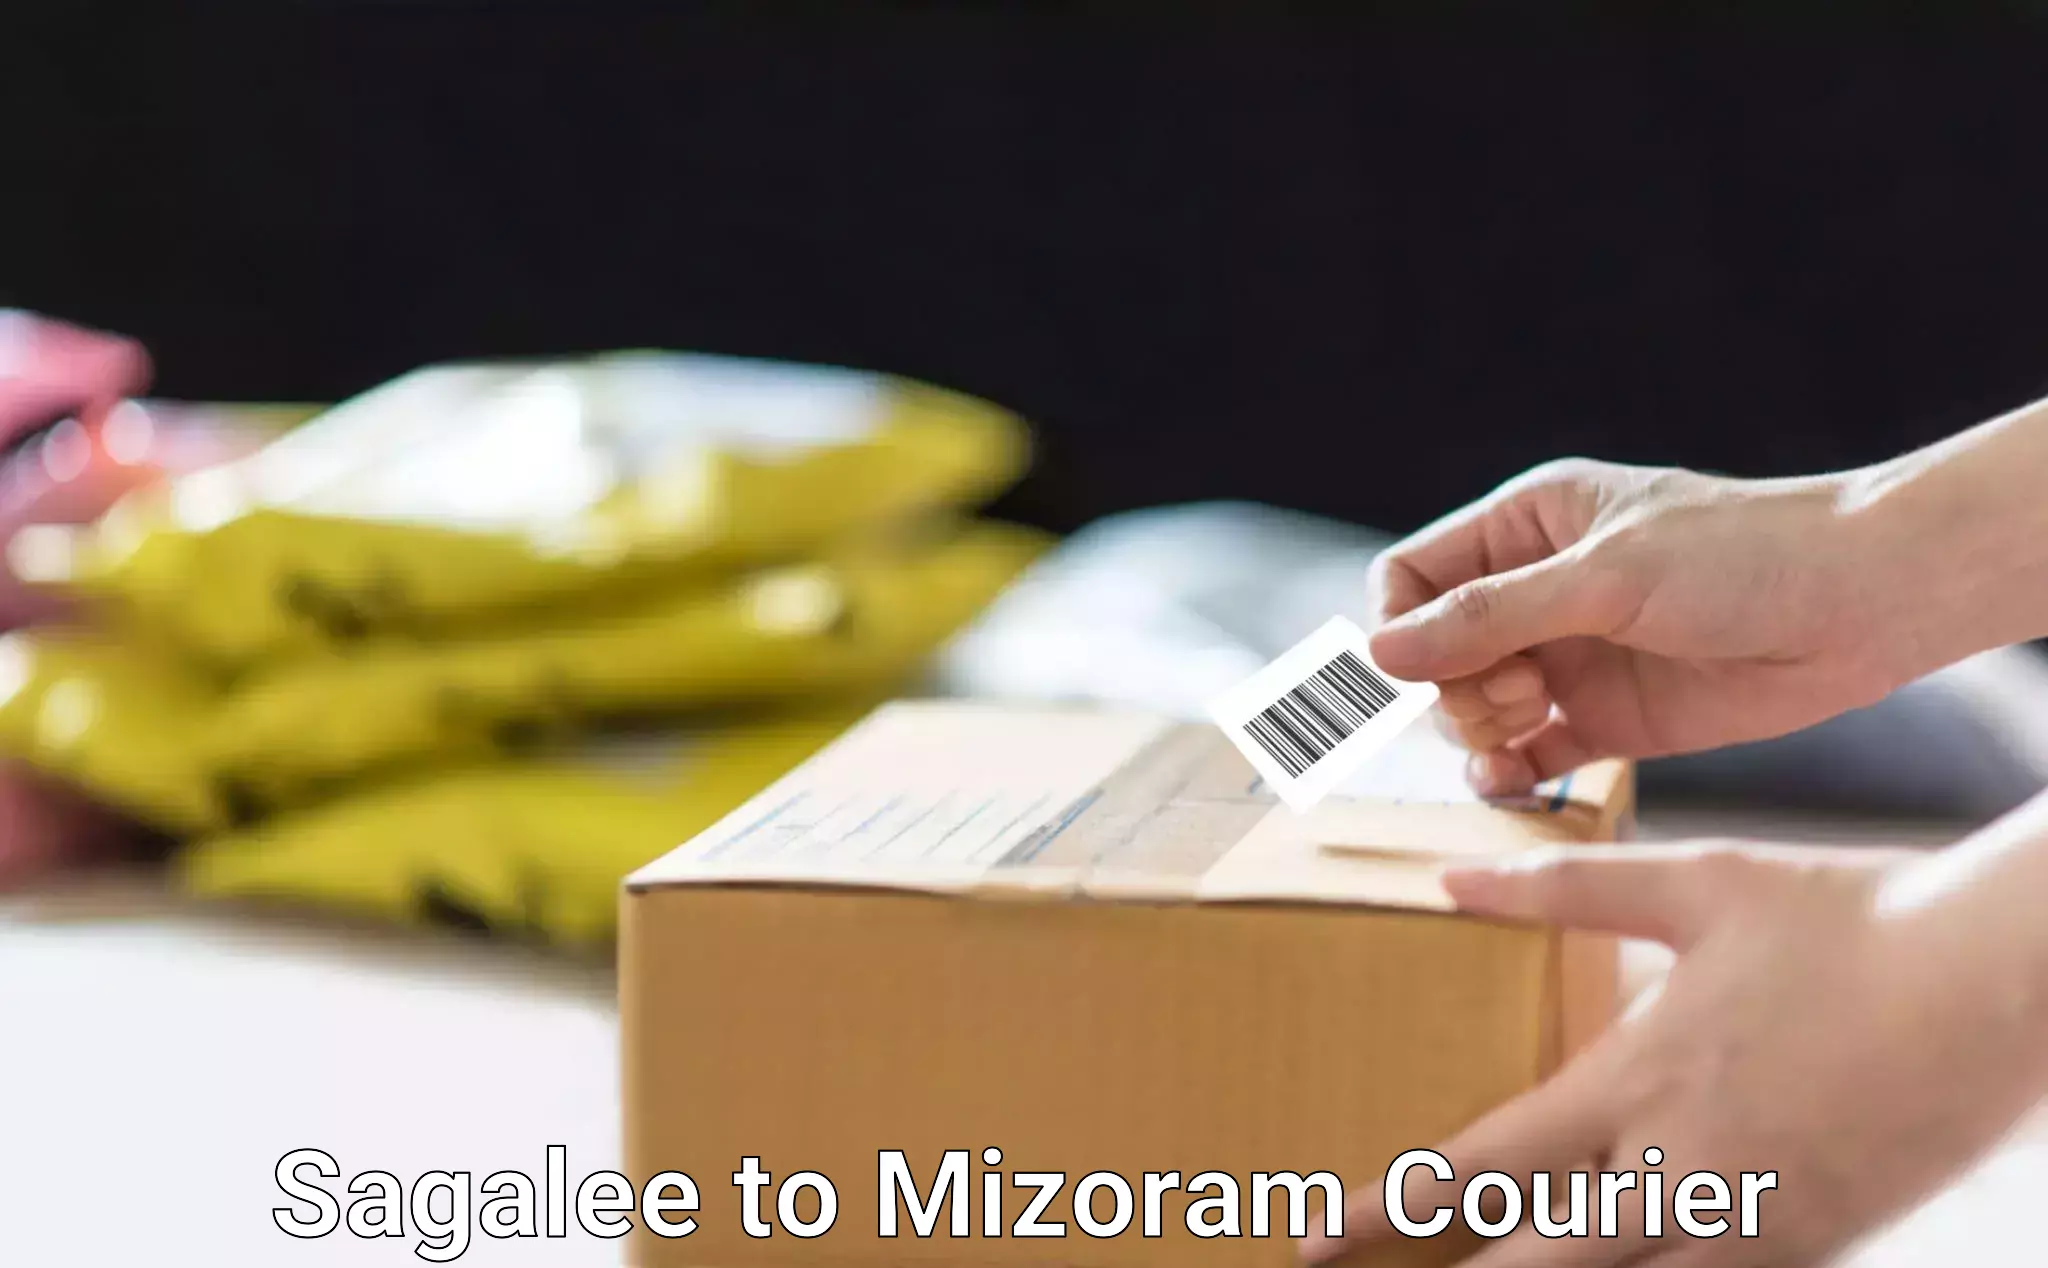 Business delivery service Sagalee to Mizoram